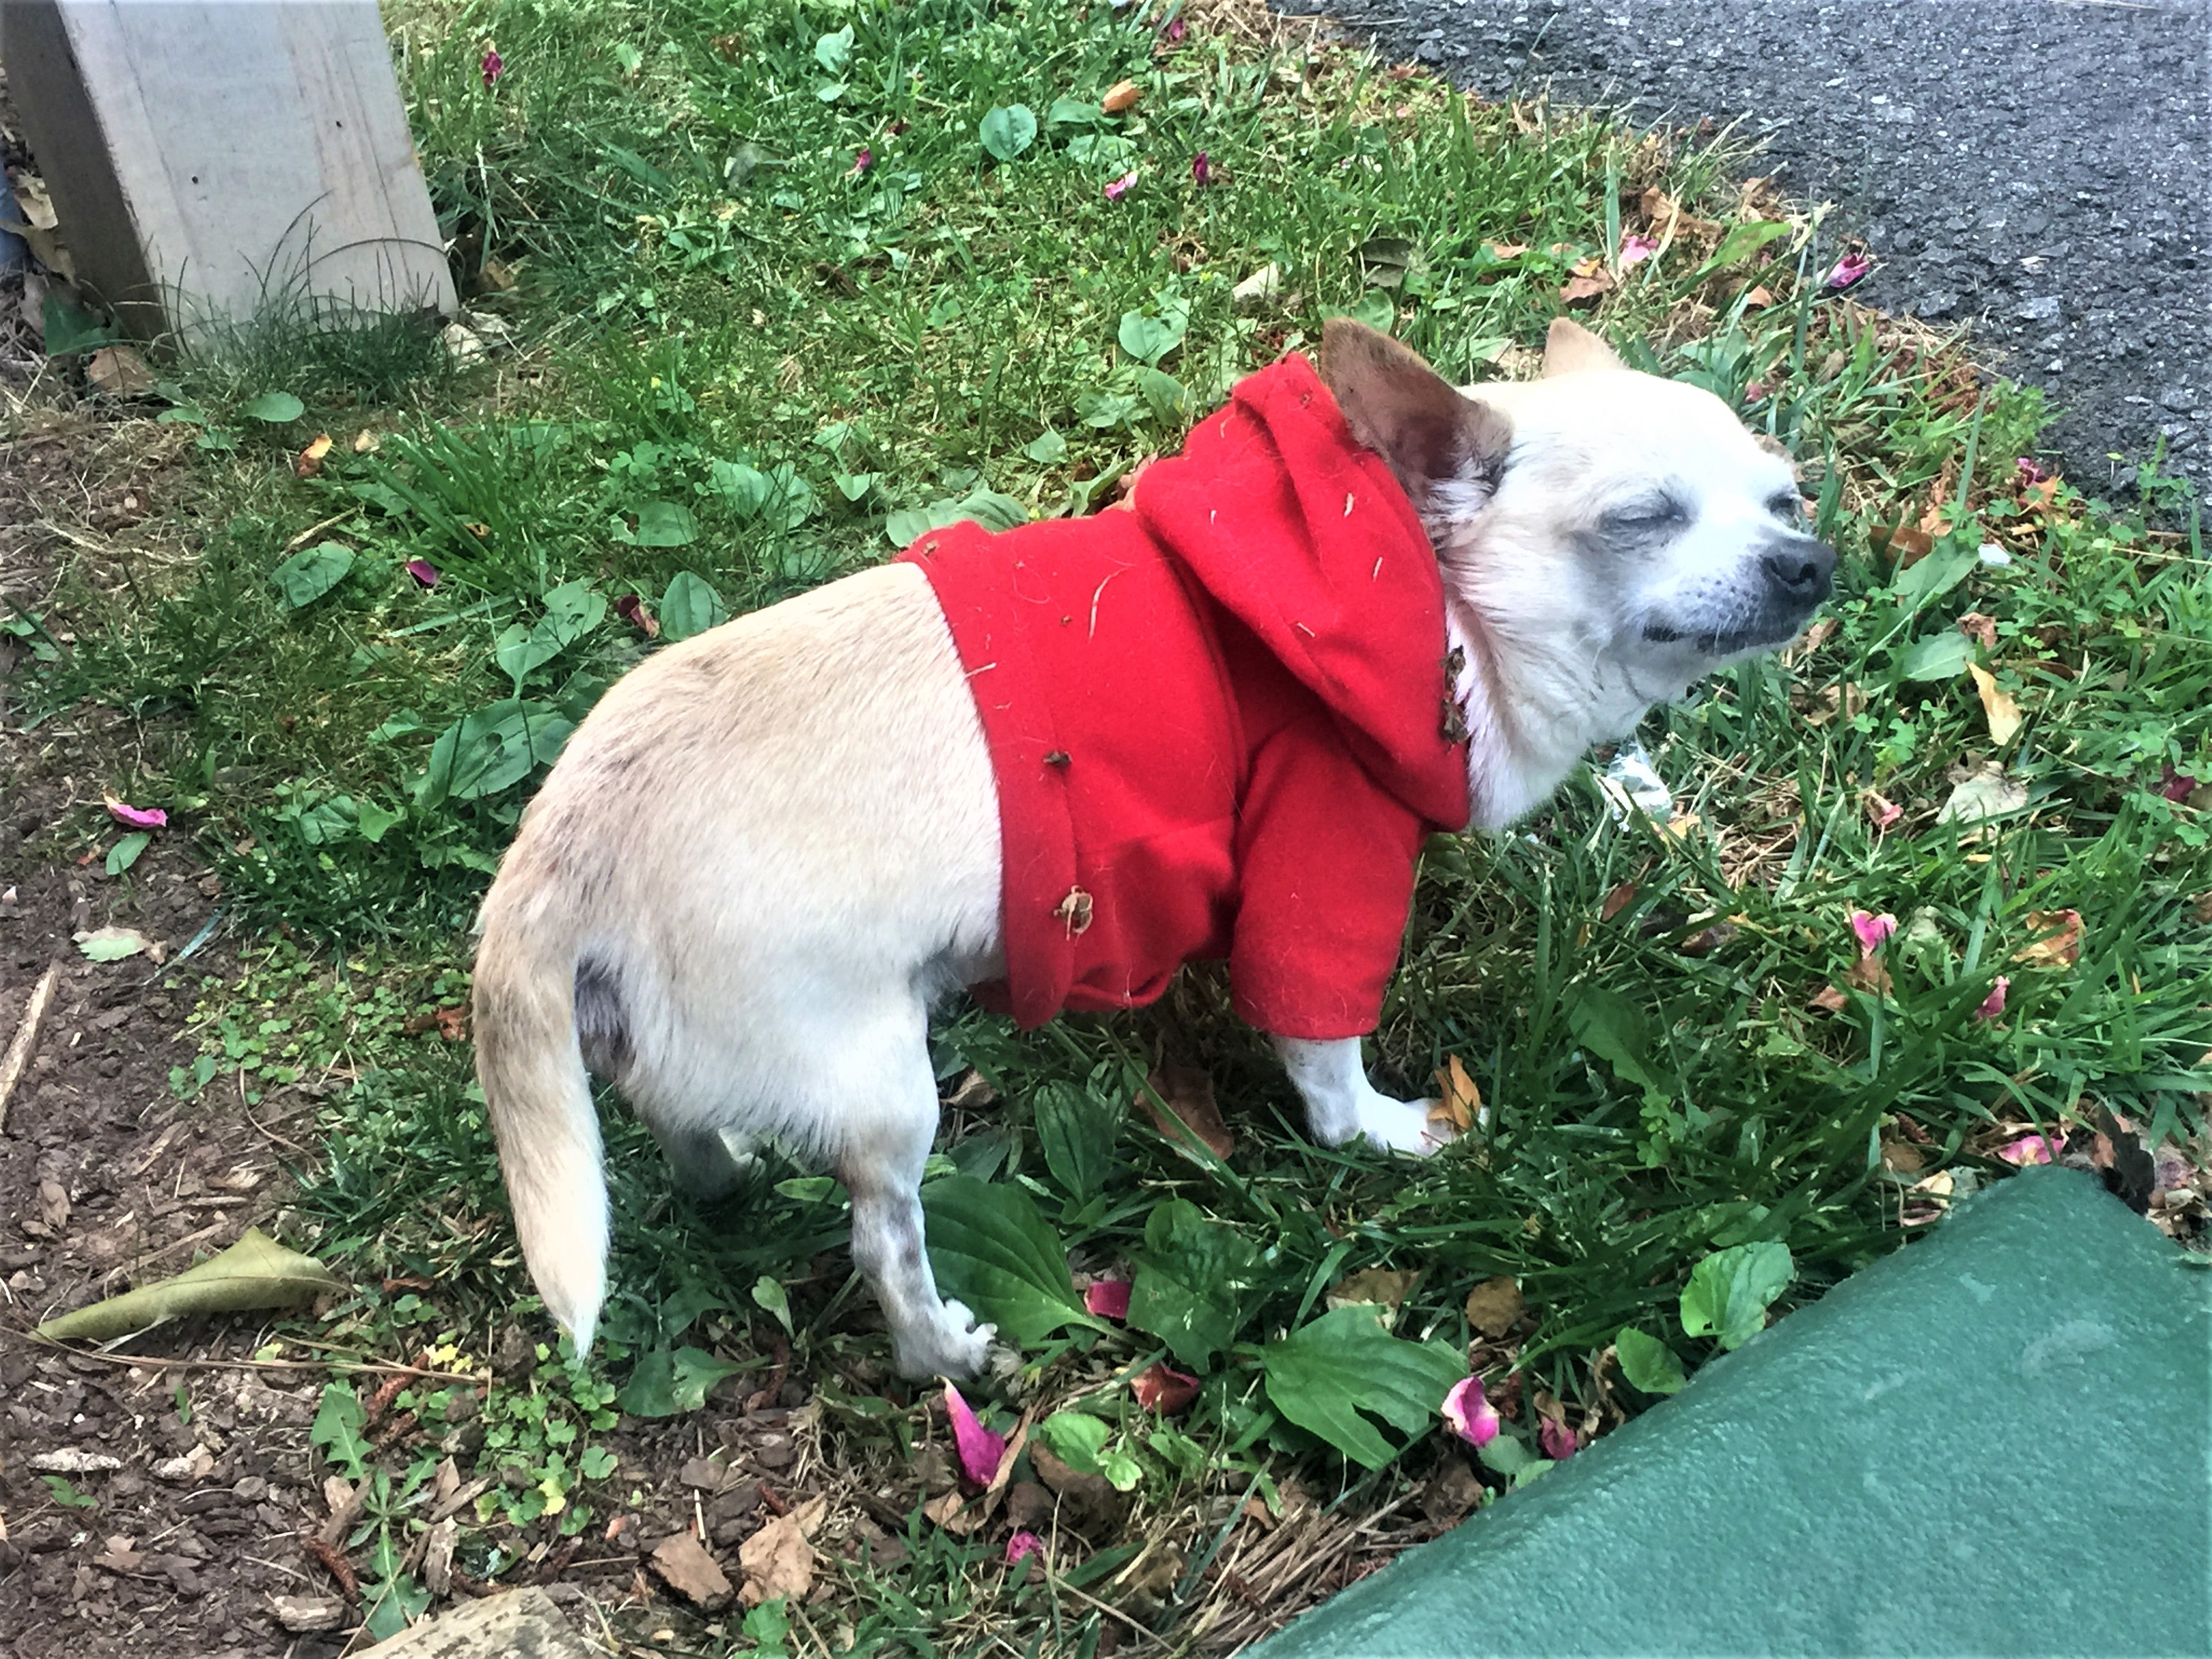 Backpack the Chihuahua in a red hoodie standing in the grass.